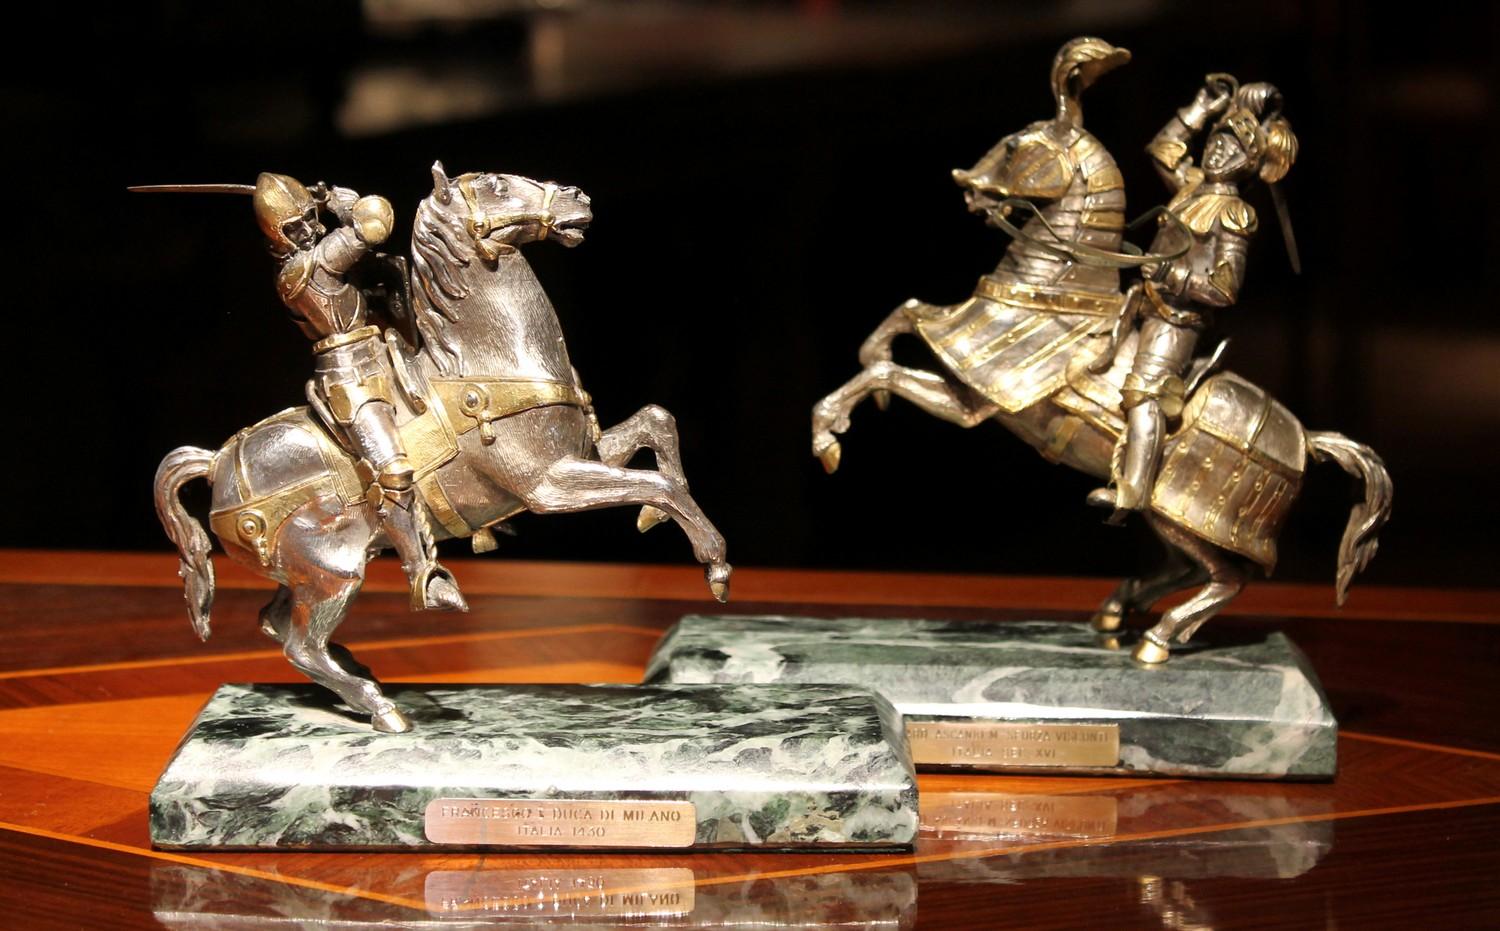 Antique Italian Sterling Silver Equestrian Knights Statues Figures on Horseback 12